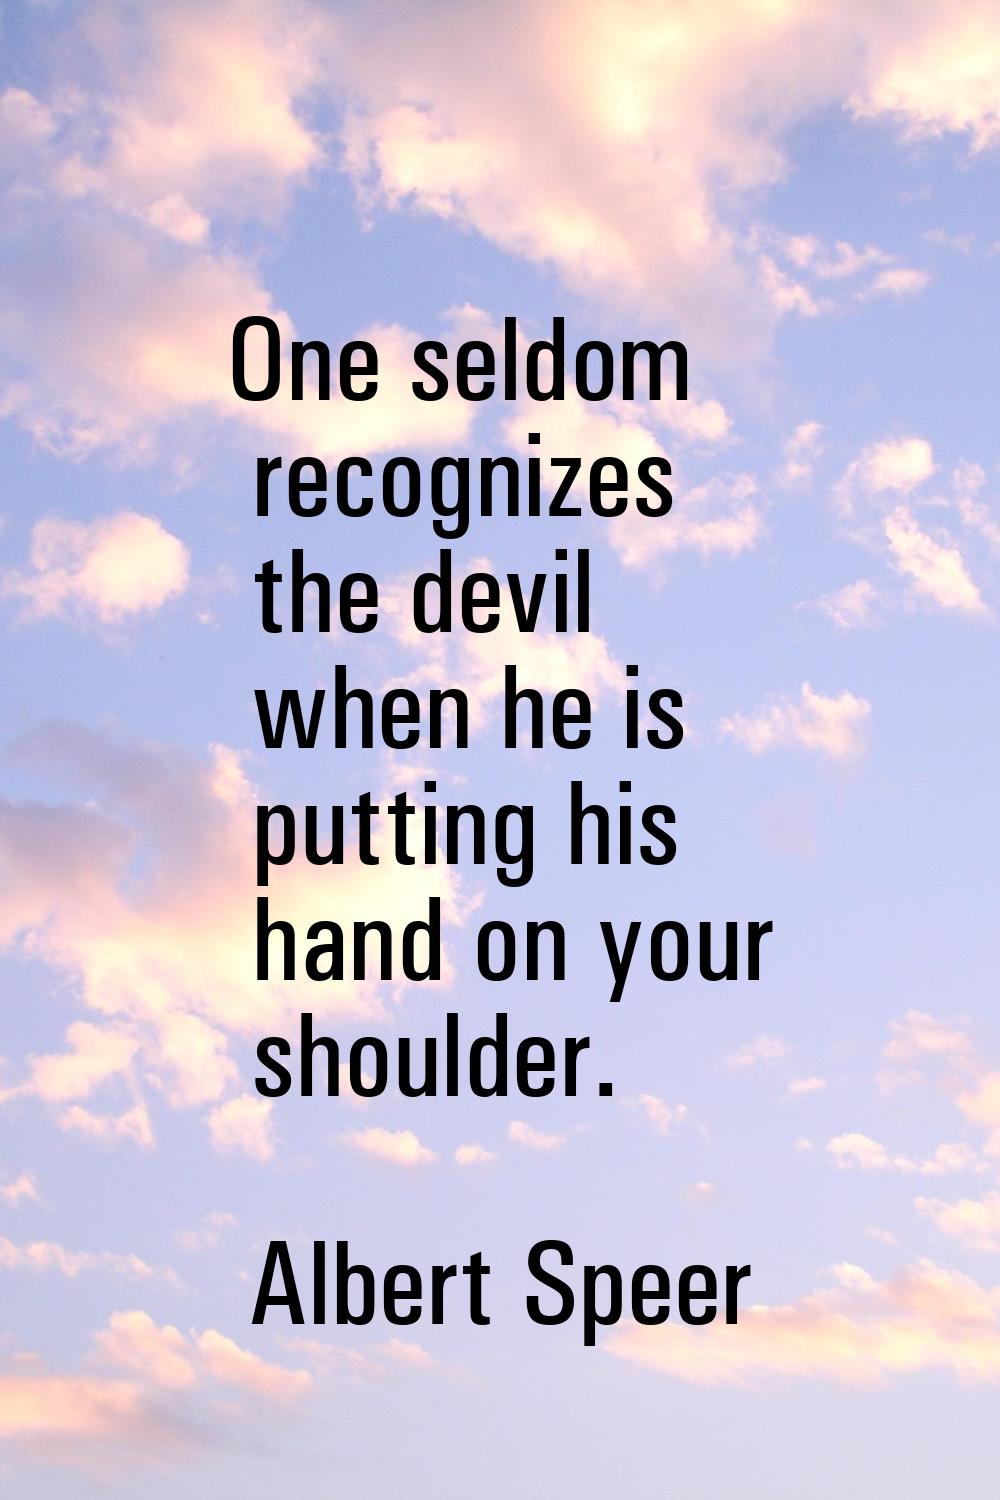 One seldom recognizes the devil when he is putting his hand on your shoulder.